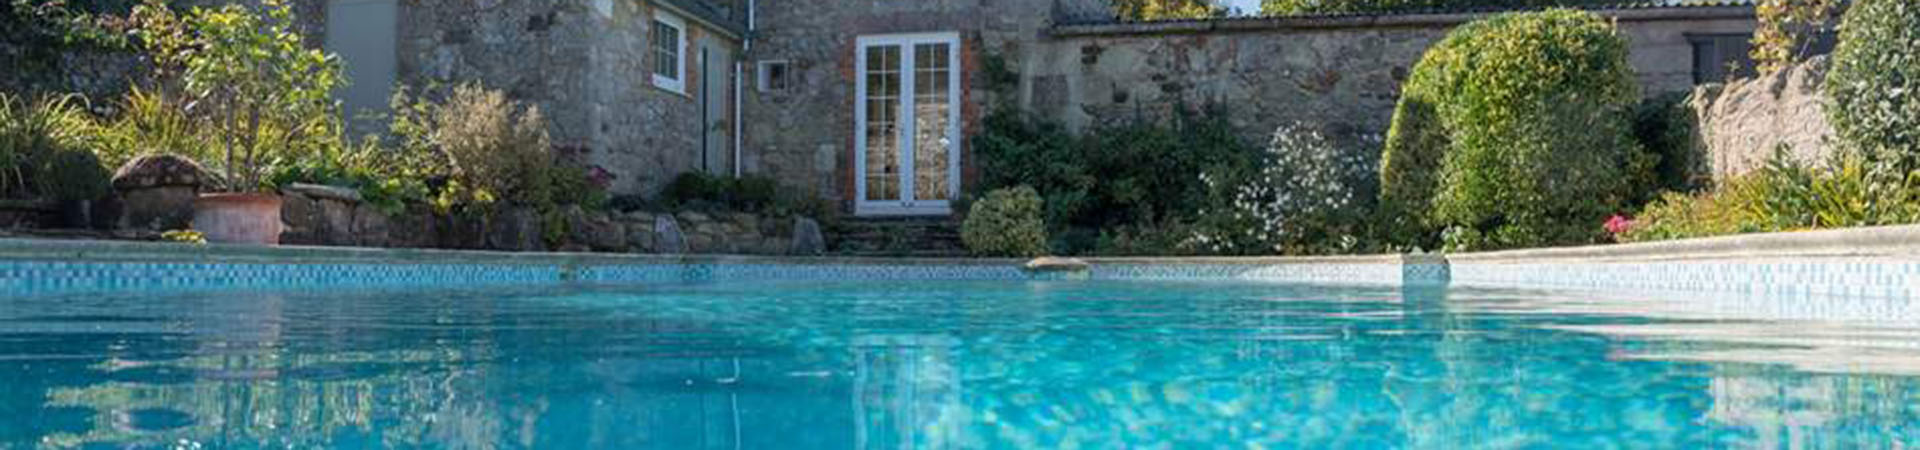 Holiday cottages with pools in Sussex